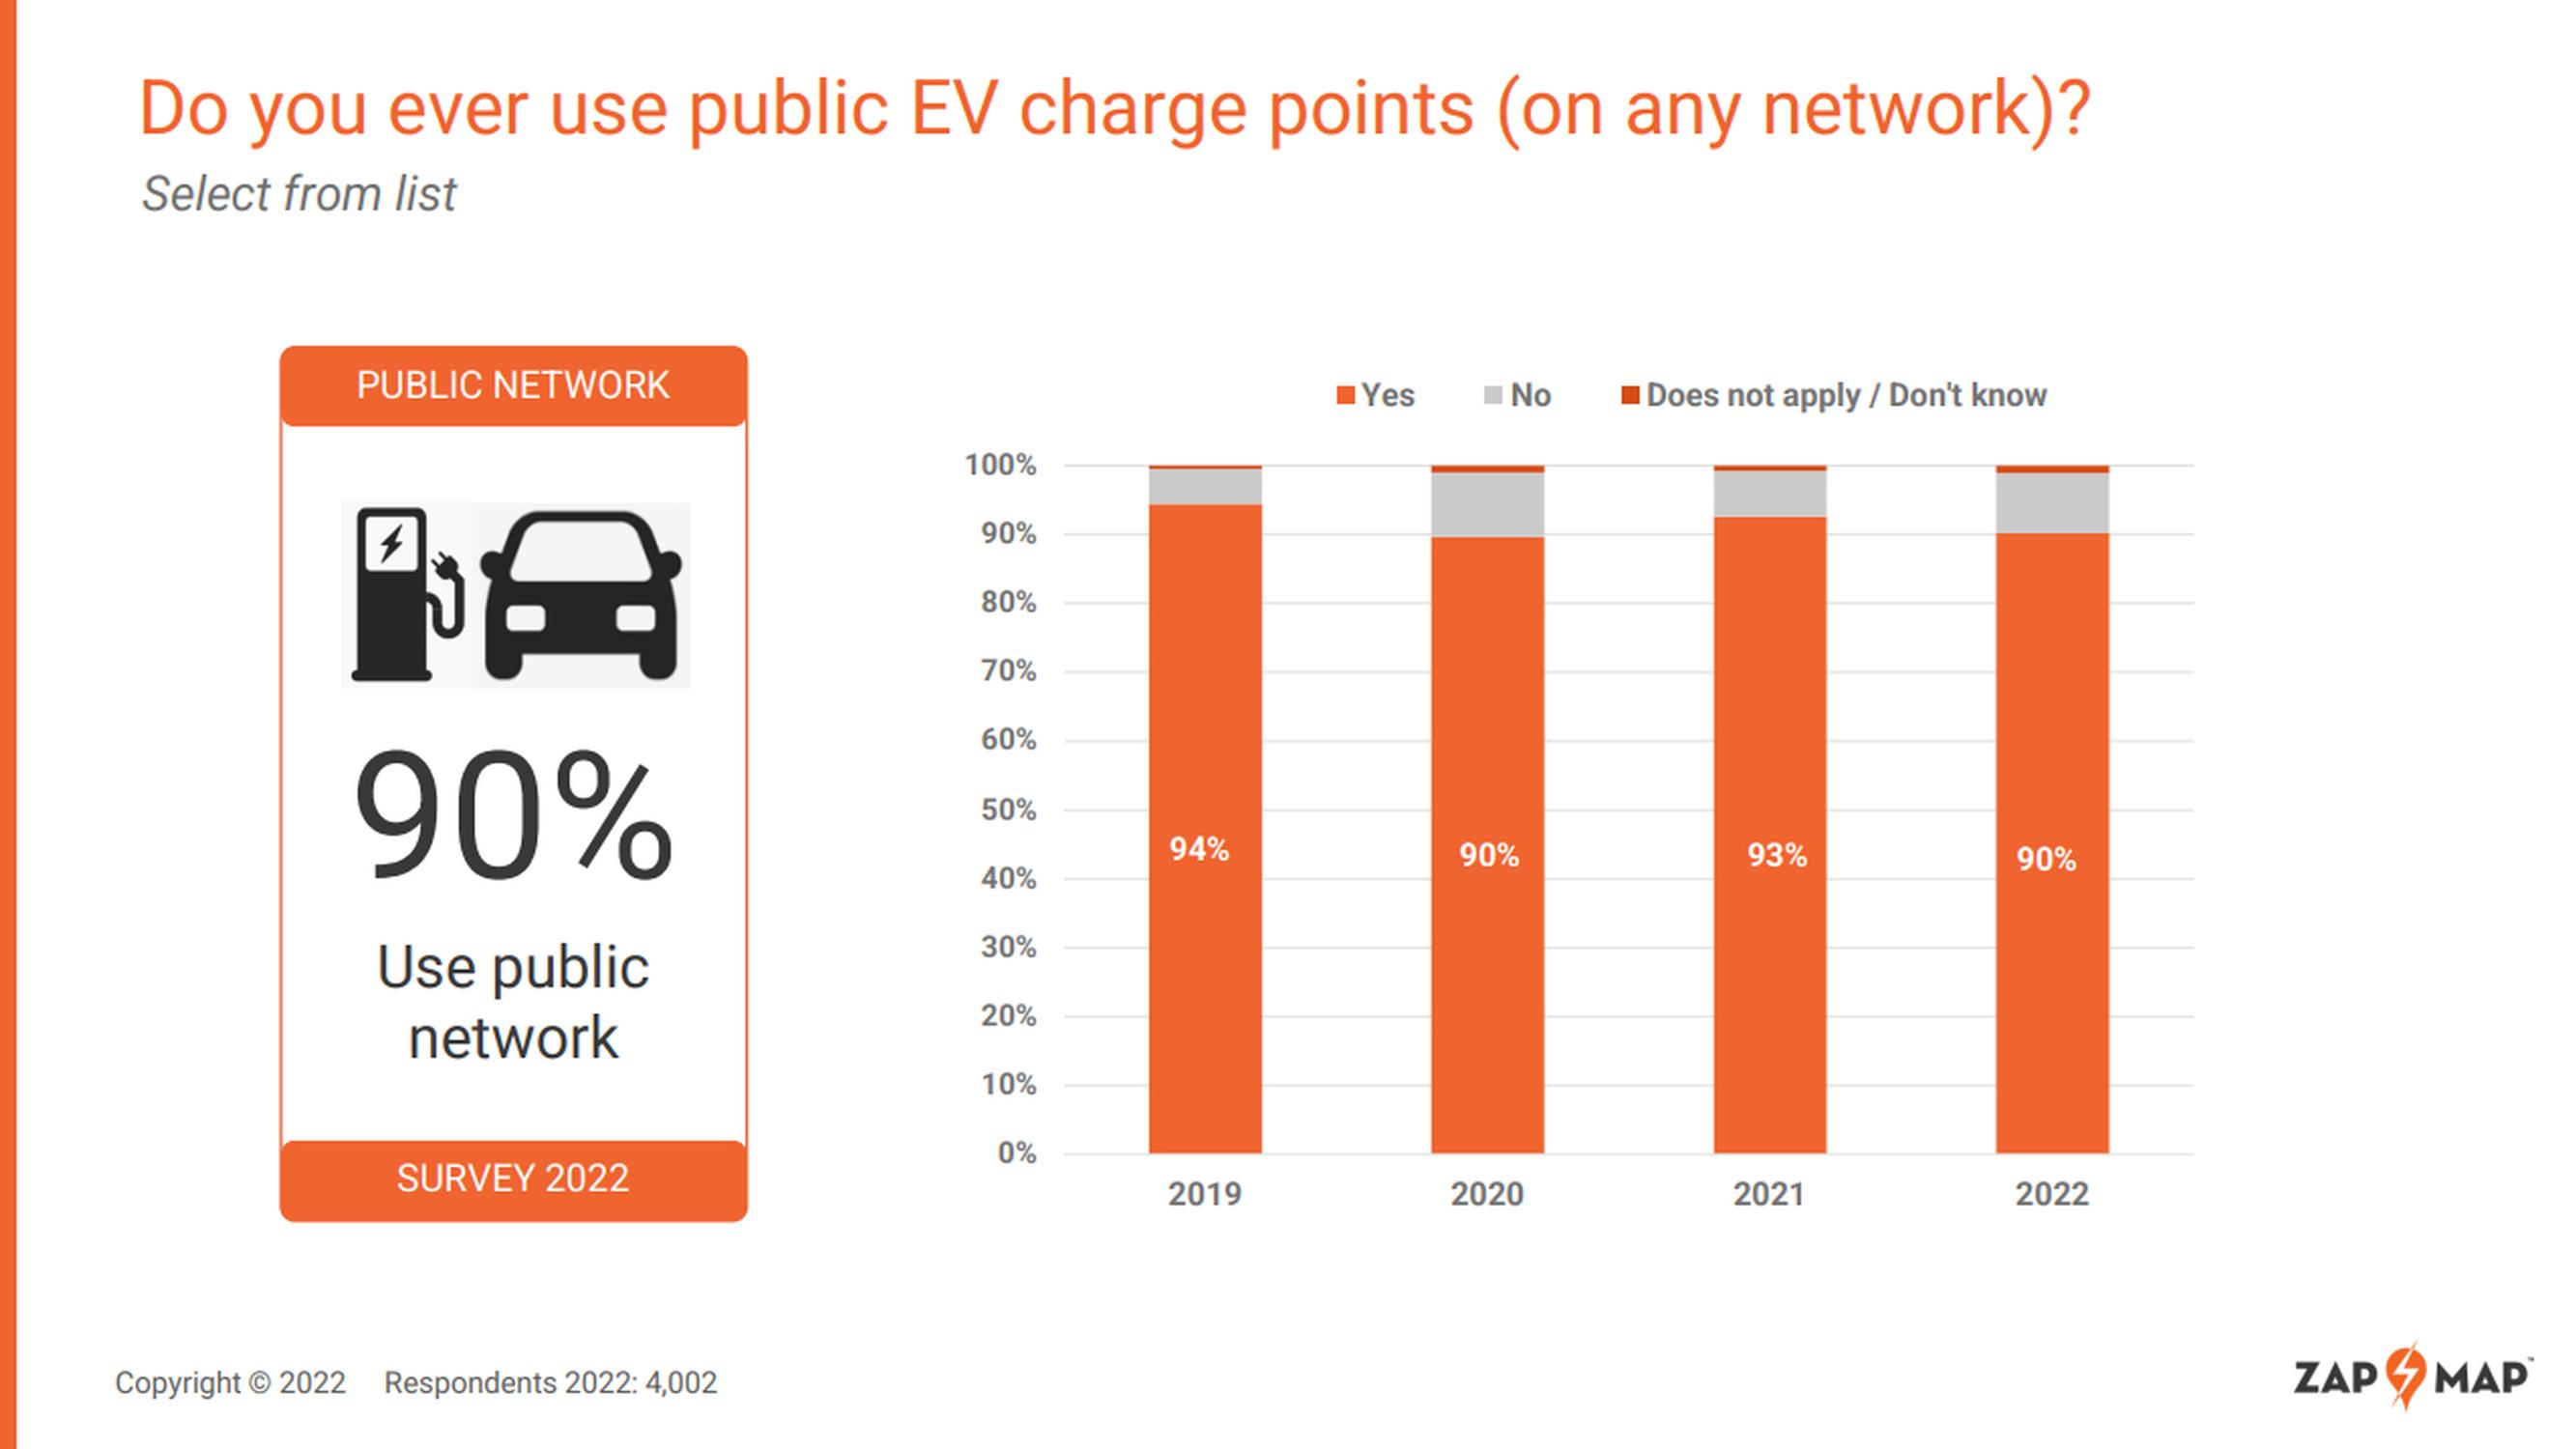 90% of EV drivers use public charging networks on a regular basis